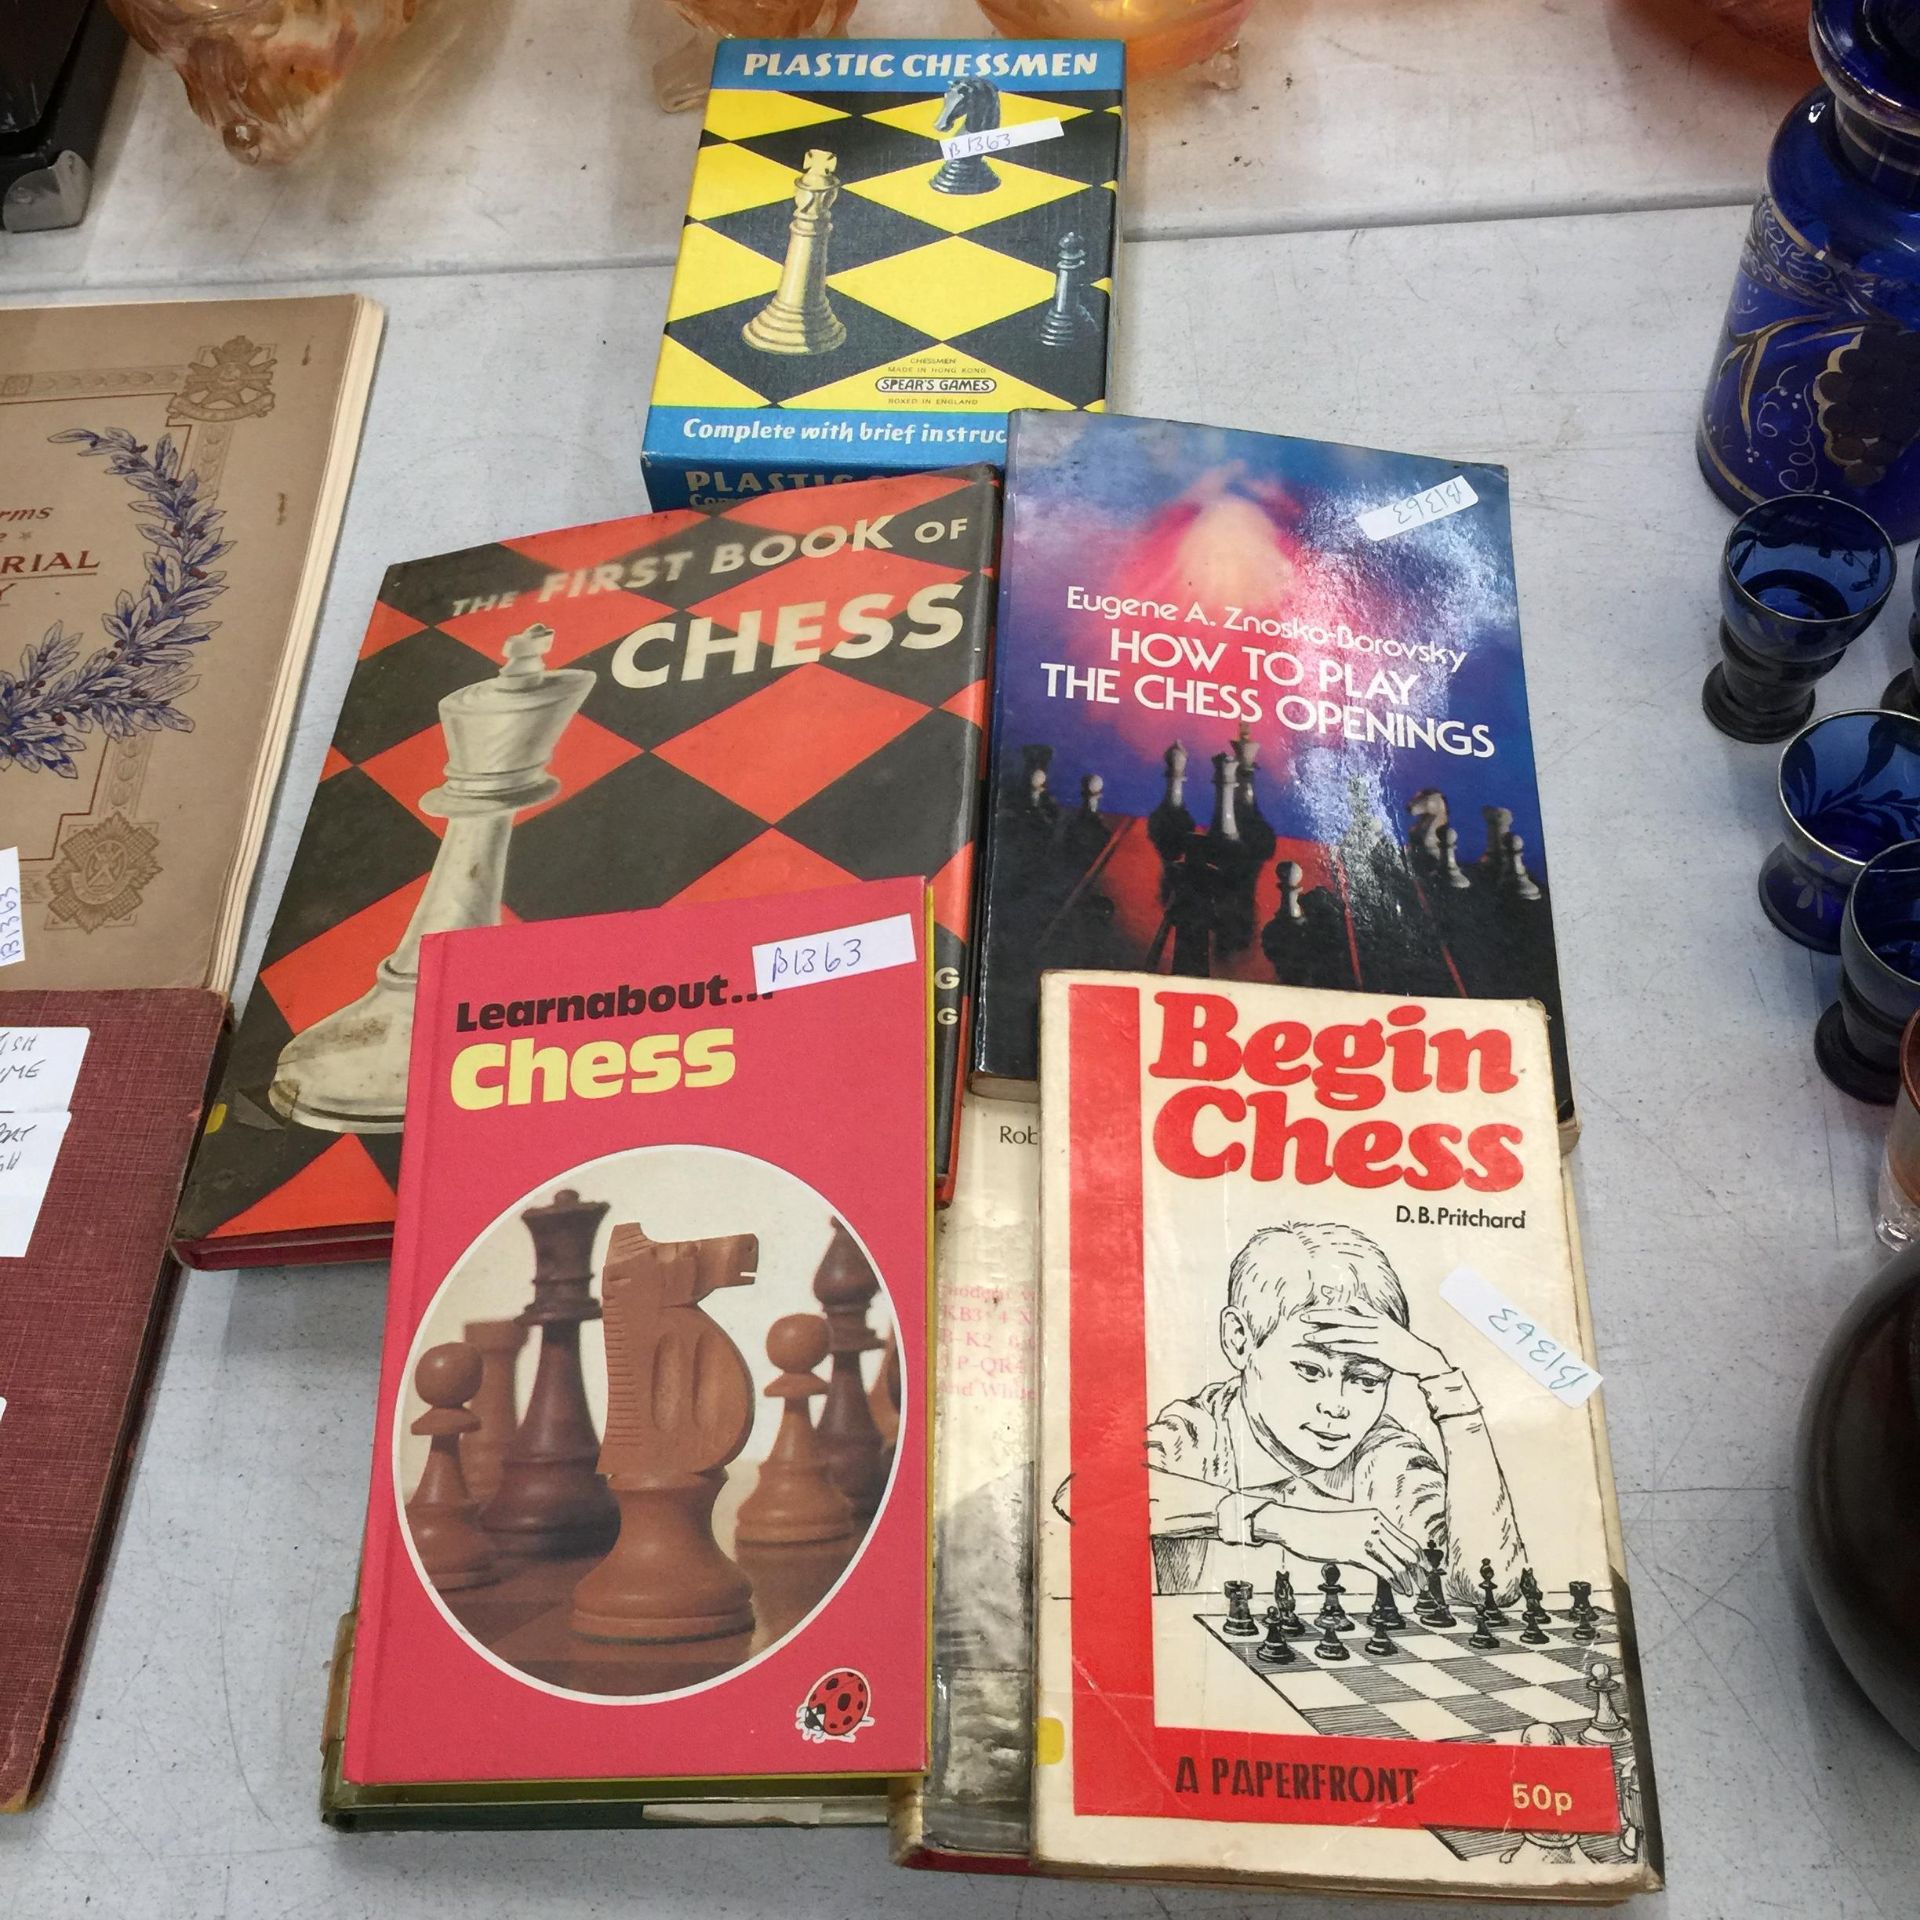 A SET OF VINTAGE SPEAR'S GAMES CHESSMEN PLUS SIX CHESS BOOKS